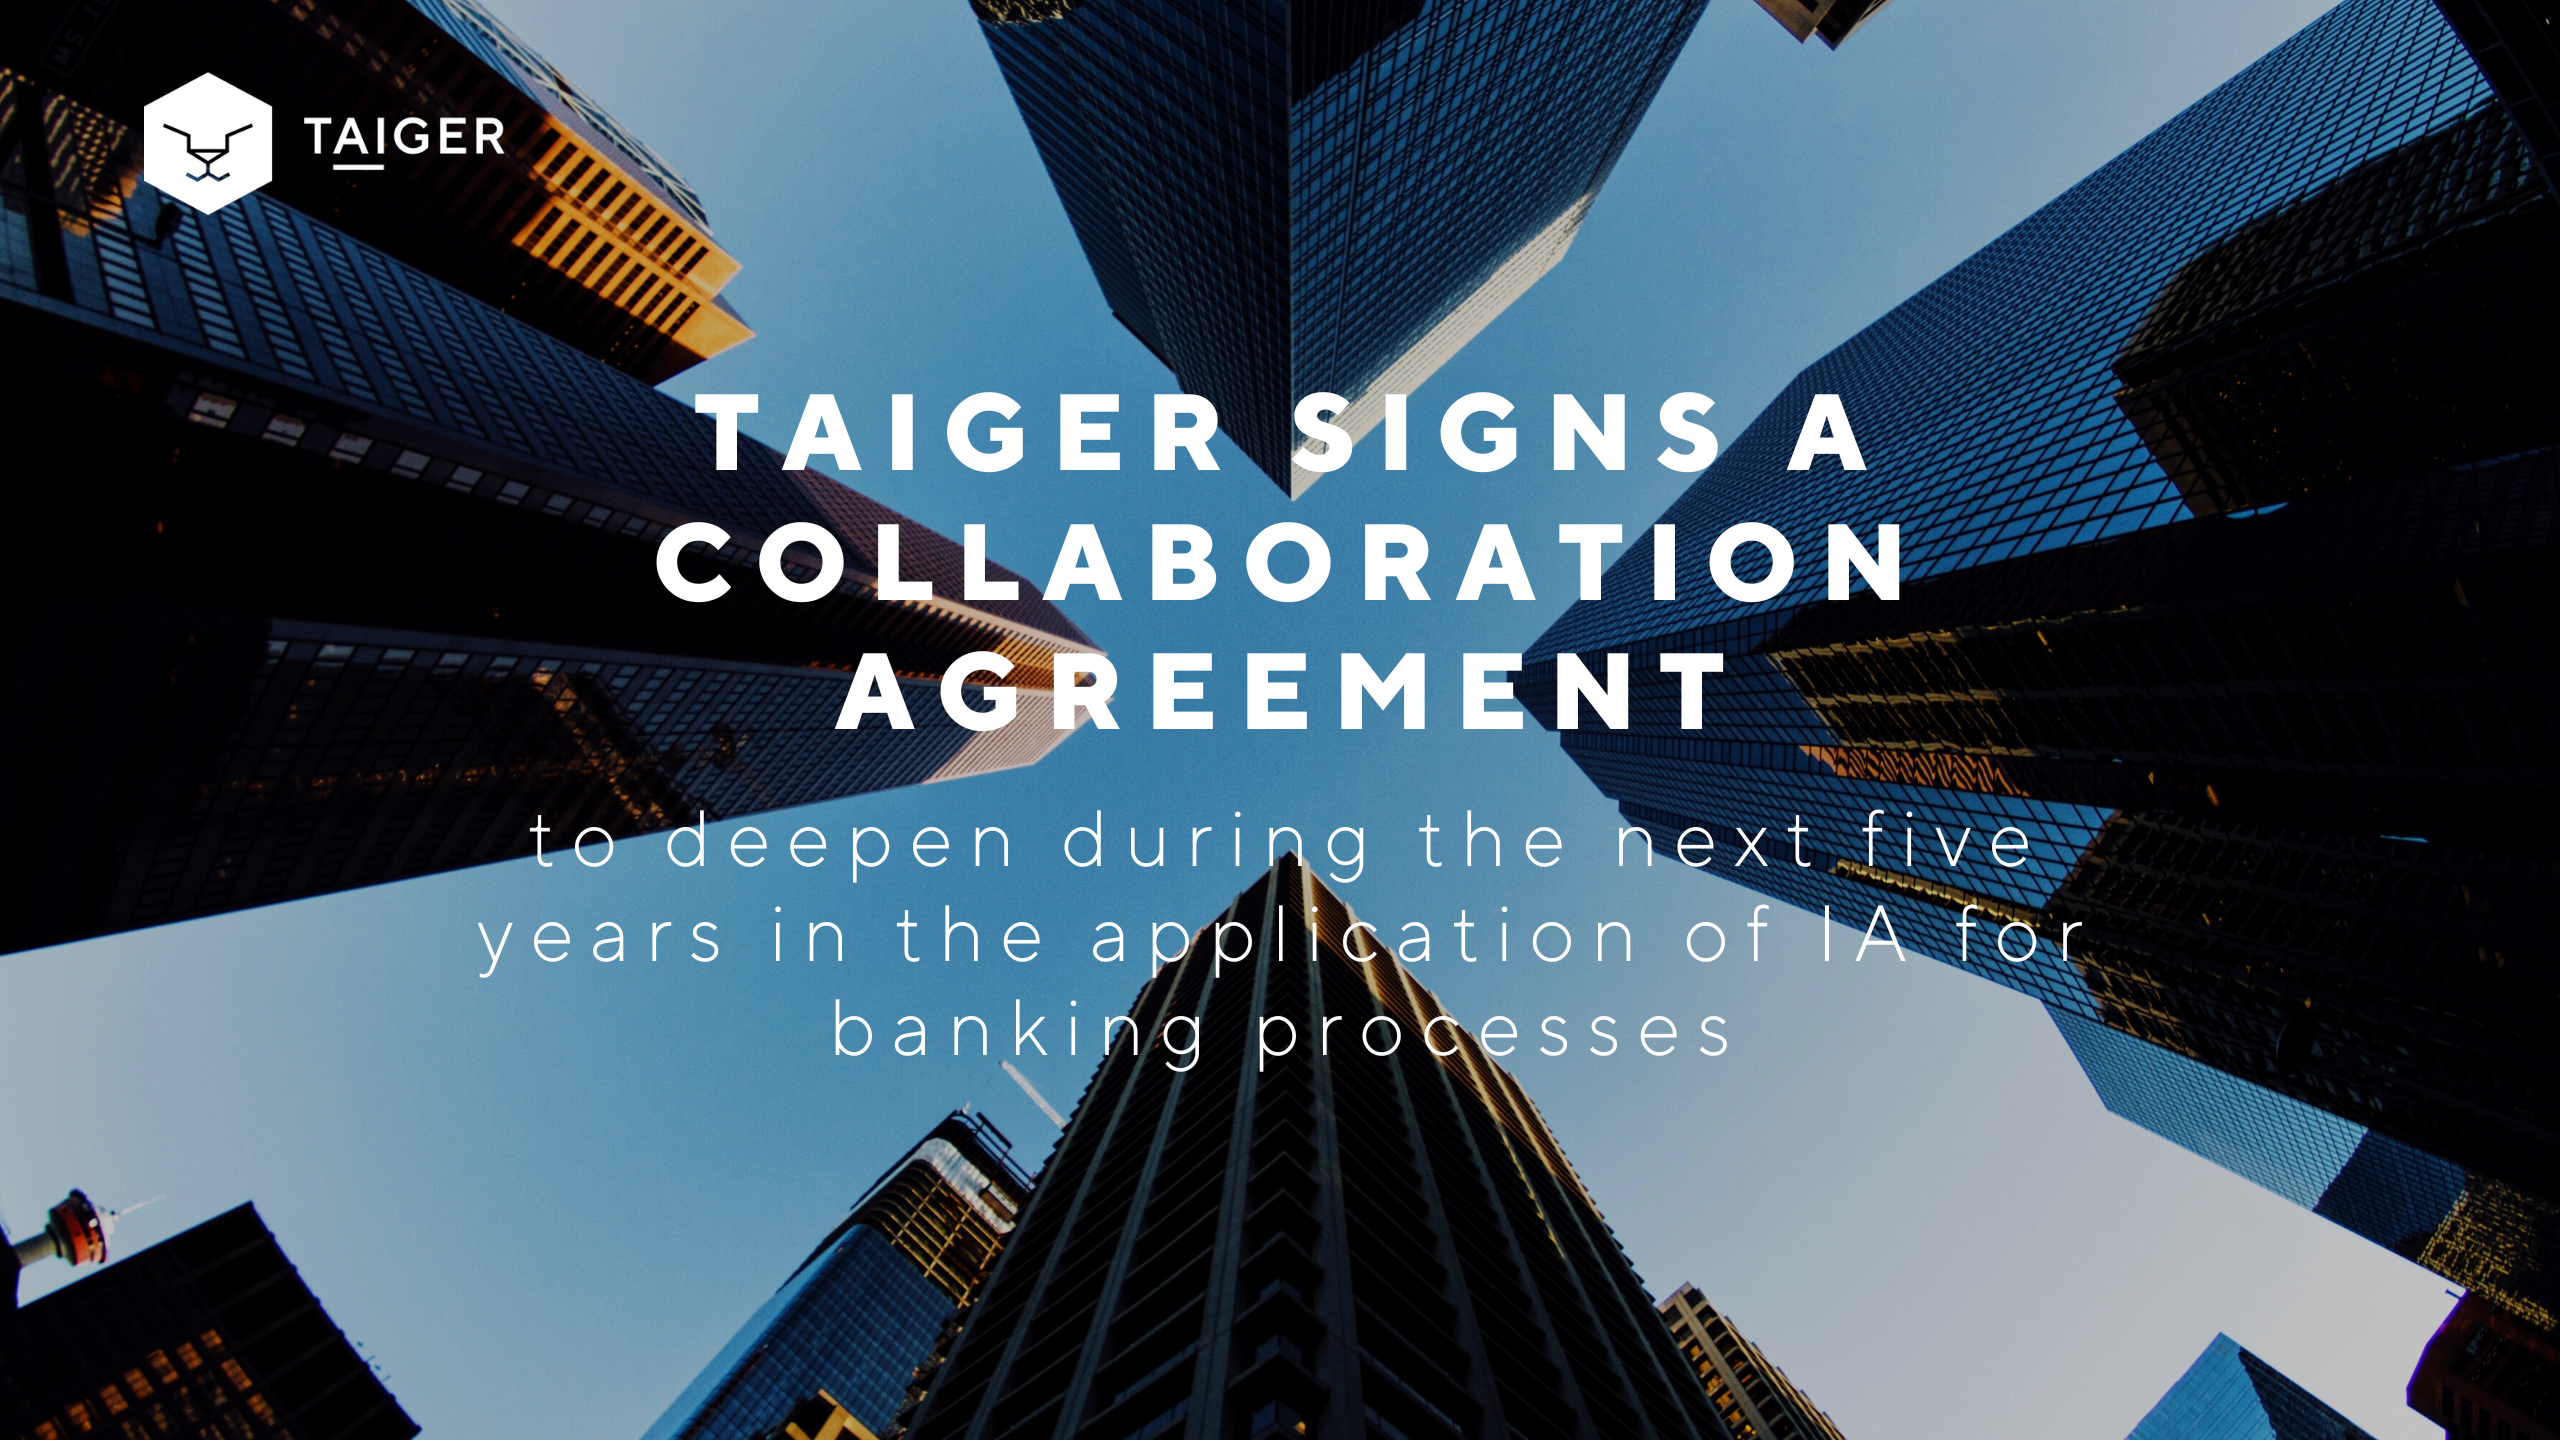 Taiger signs a collaboration agreement to deepen during the next five years in the application of IA for banking processes